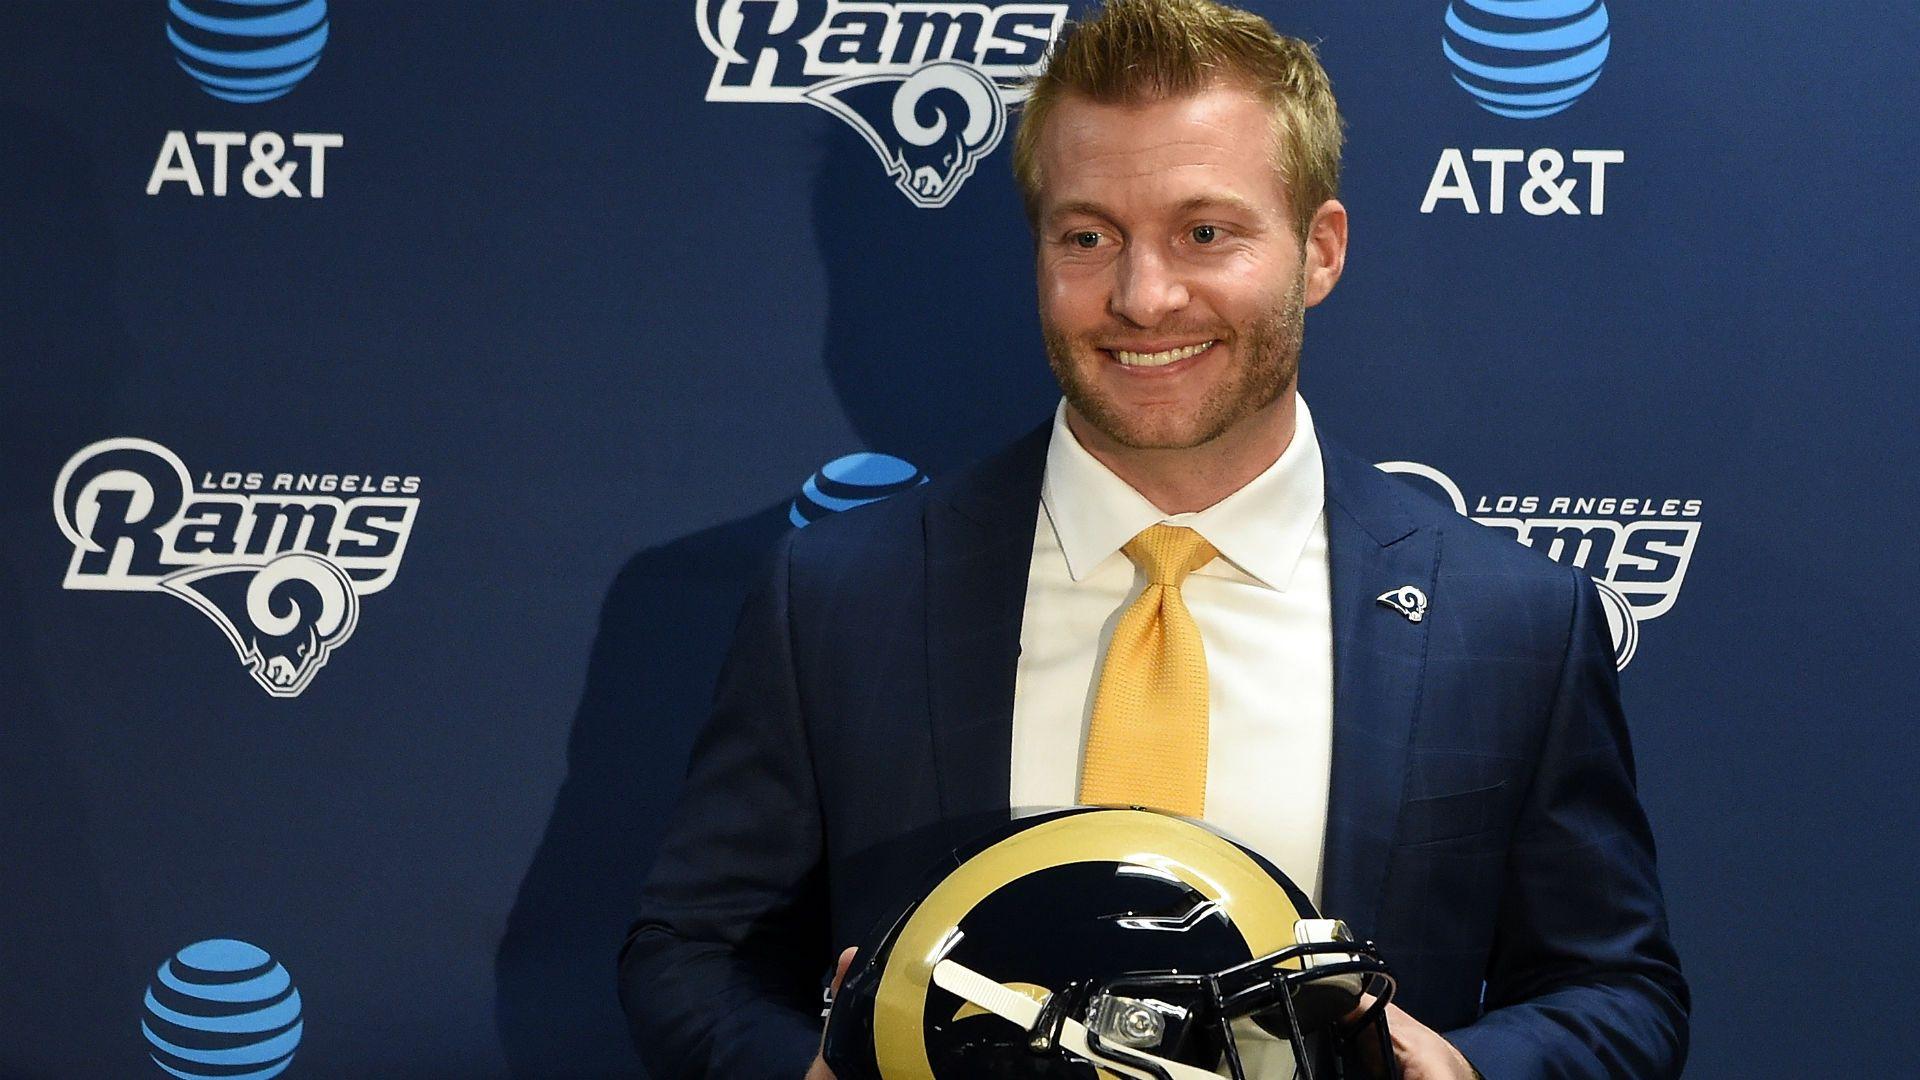 Sean McVay doesn't even look like an NFL coach, according to